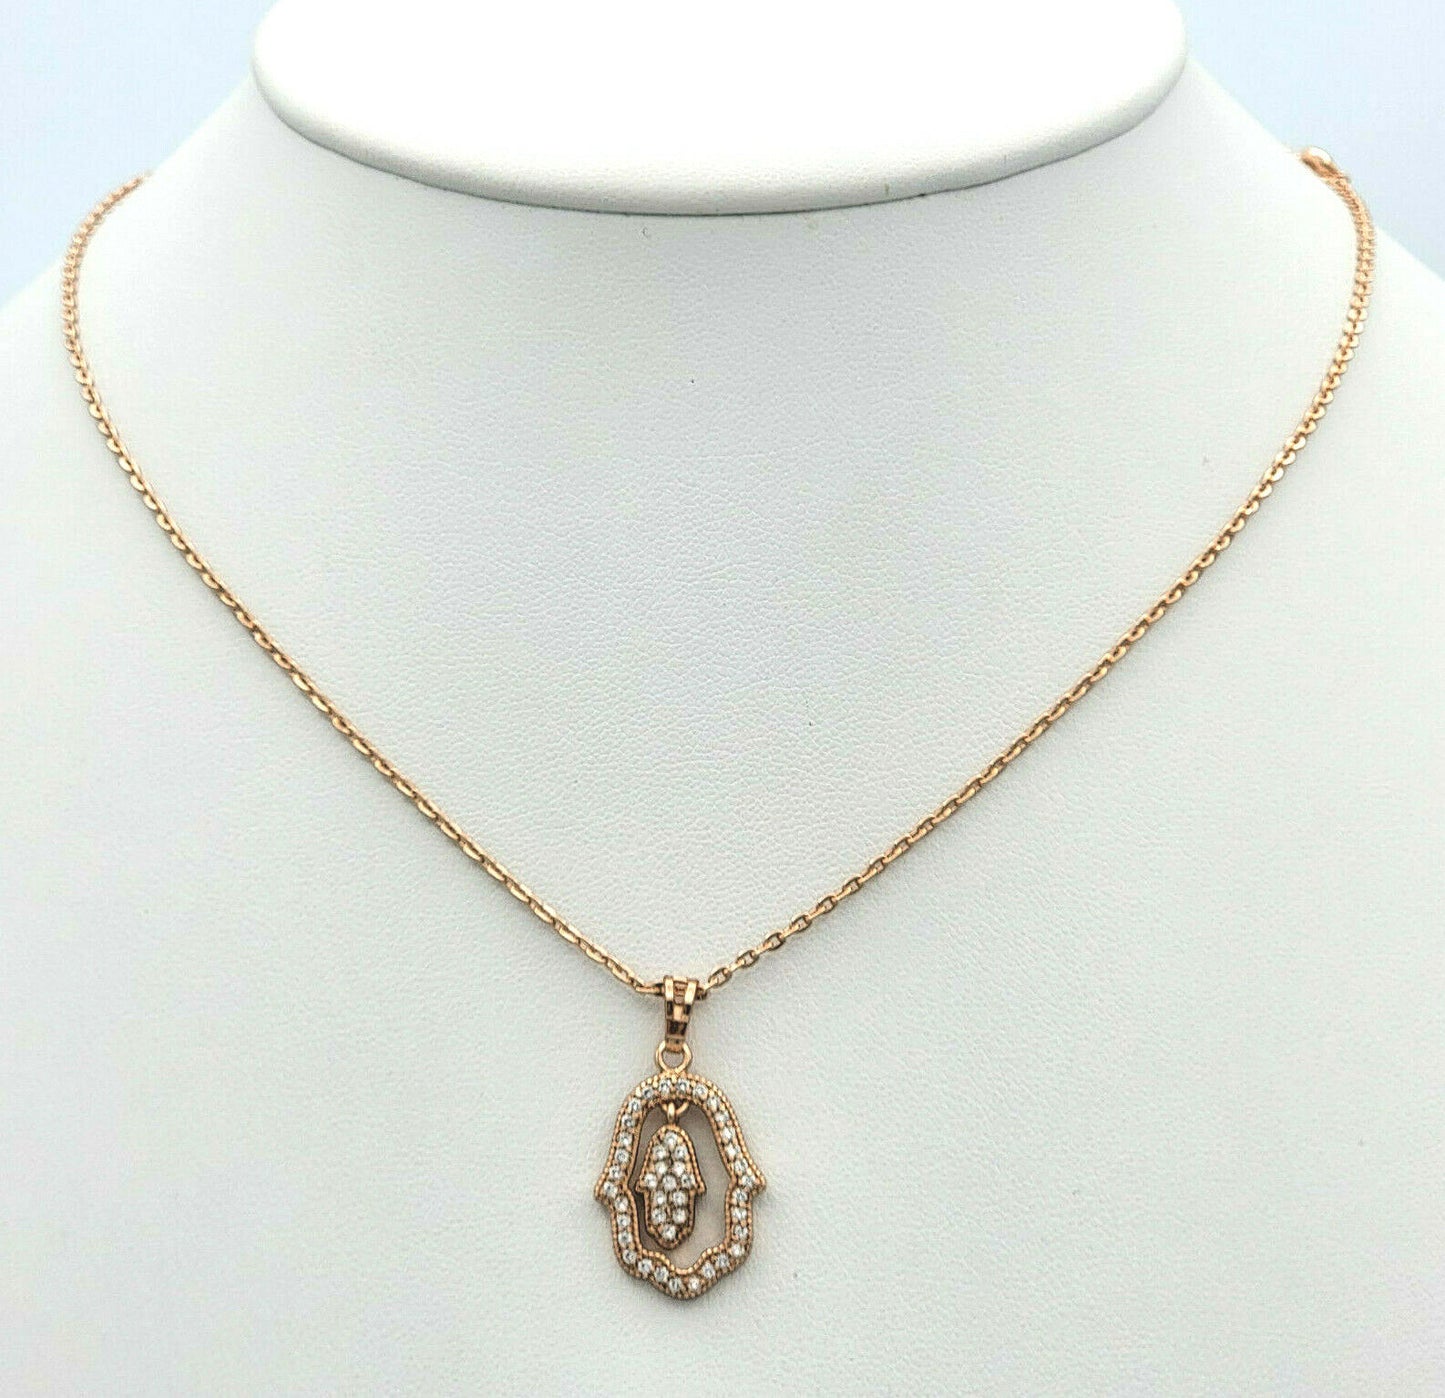 Necklaces - Rose Gold Plated. Hamsa Fatima Hand Movable Charm Pendant & Chain.